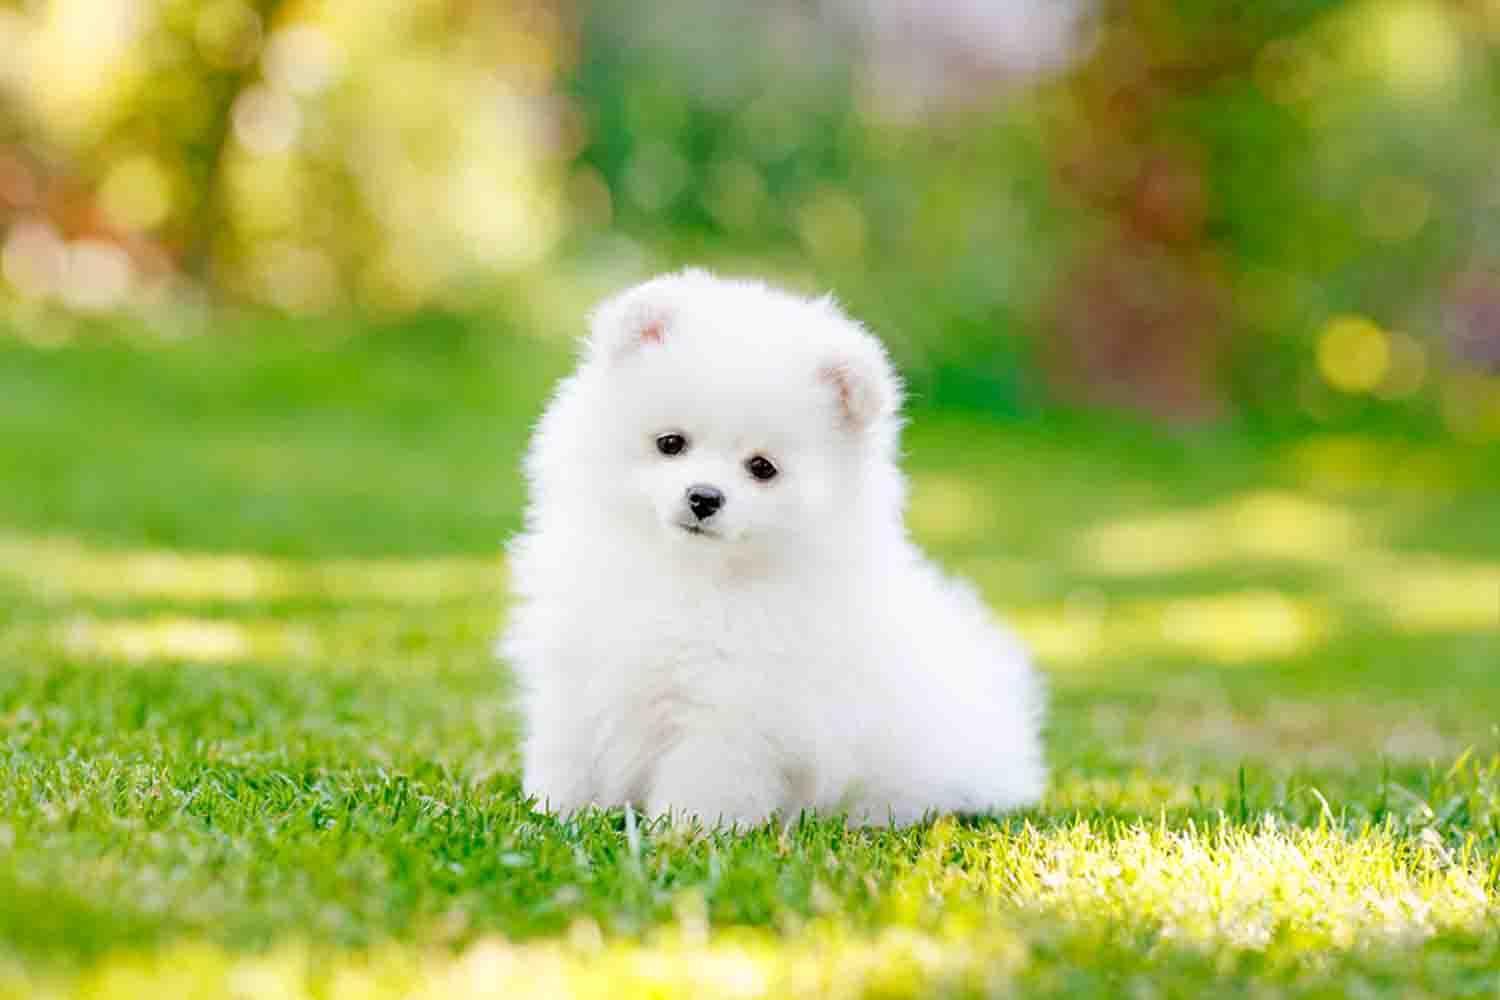 Cute Puppy Backgrounds for Android - APK Download